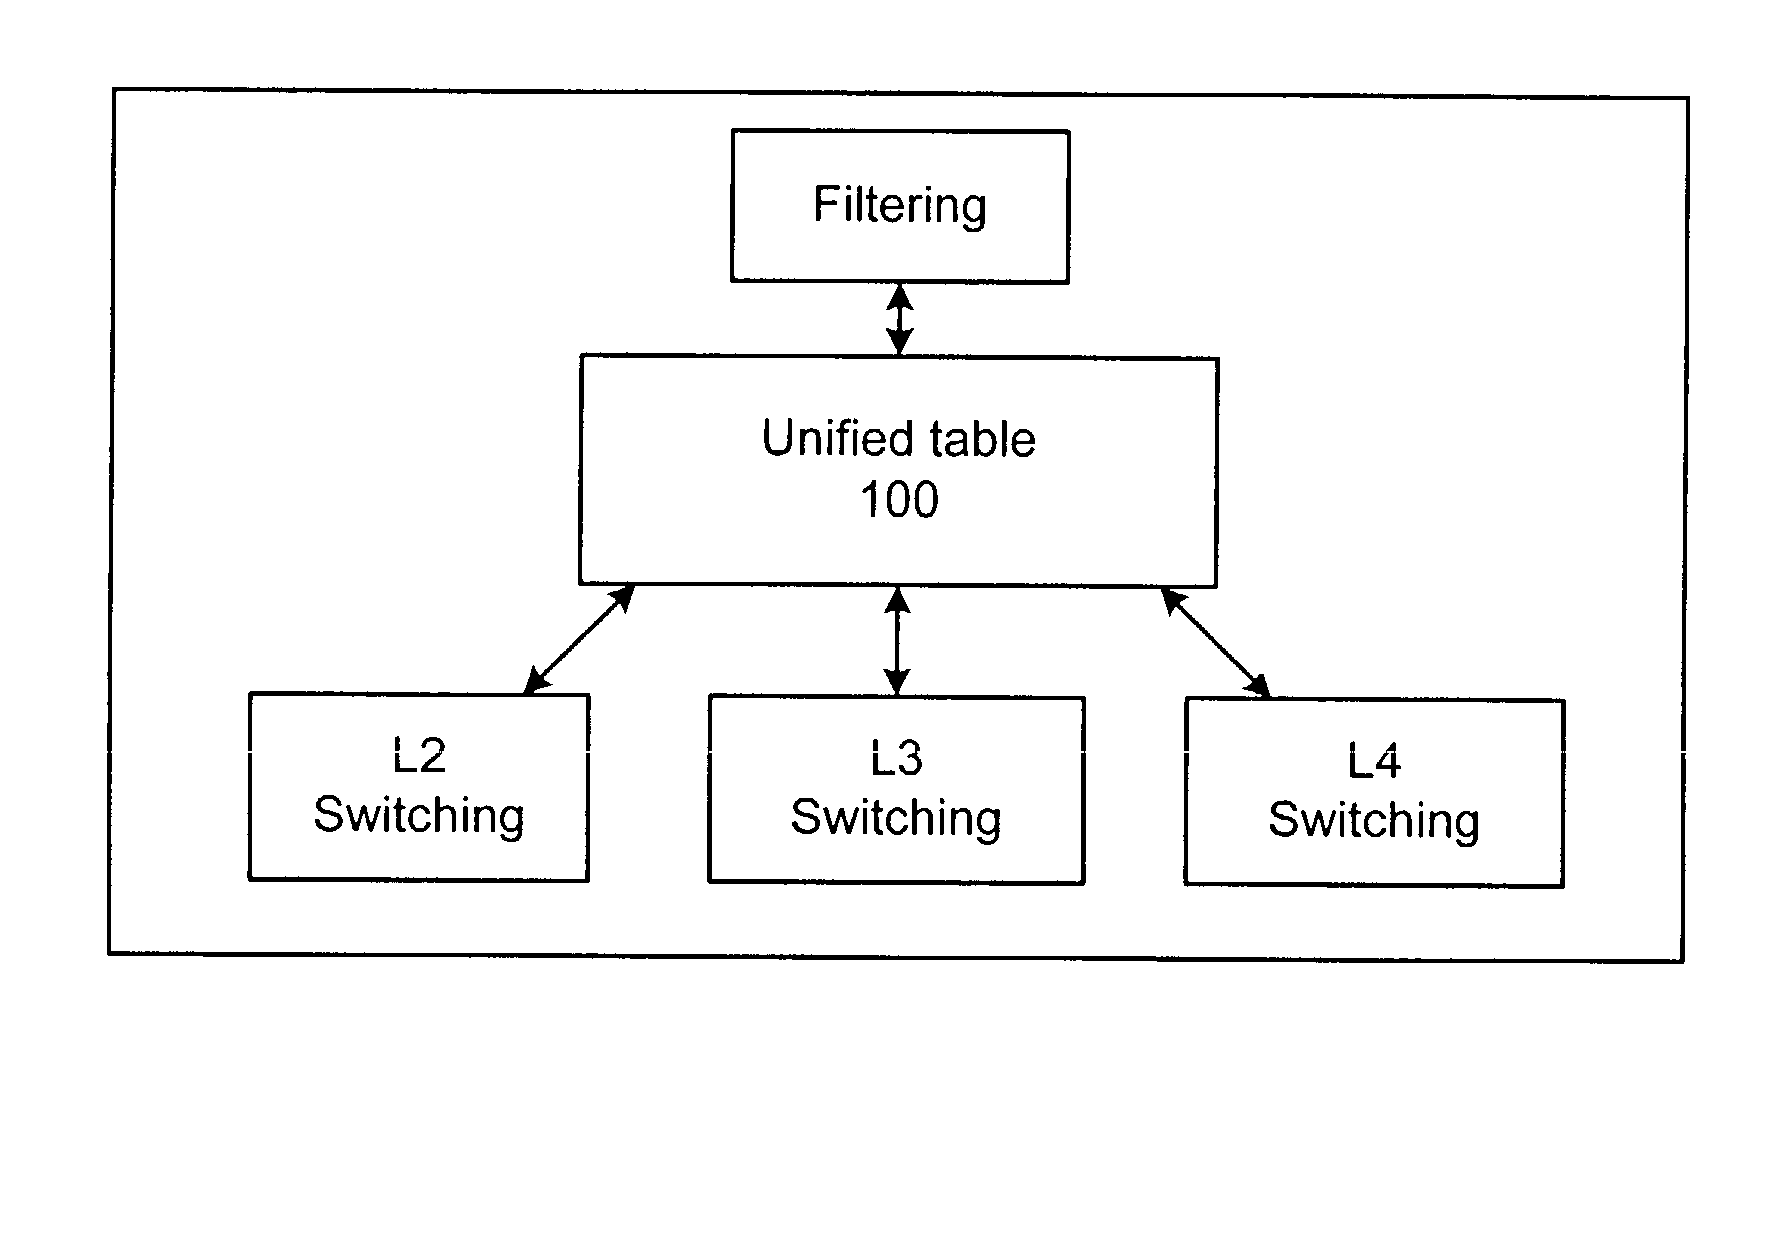 Unified table for L2, L3, L4, switching and filtering